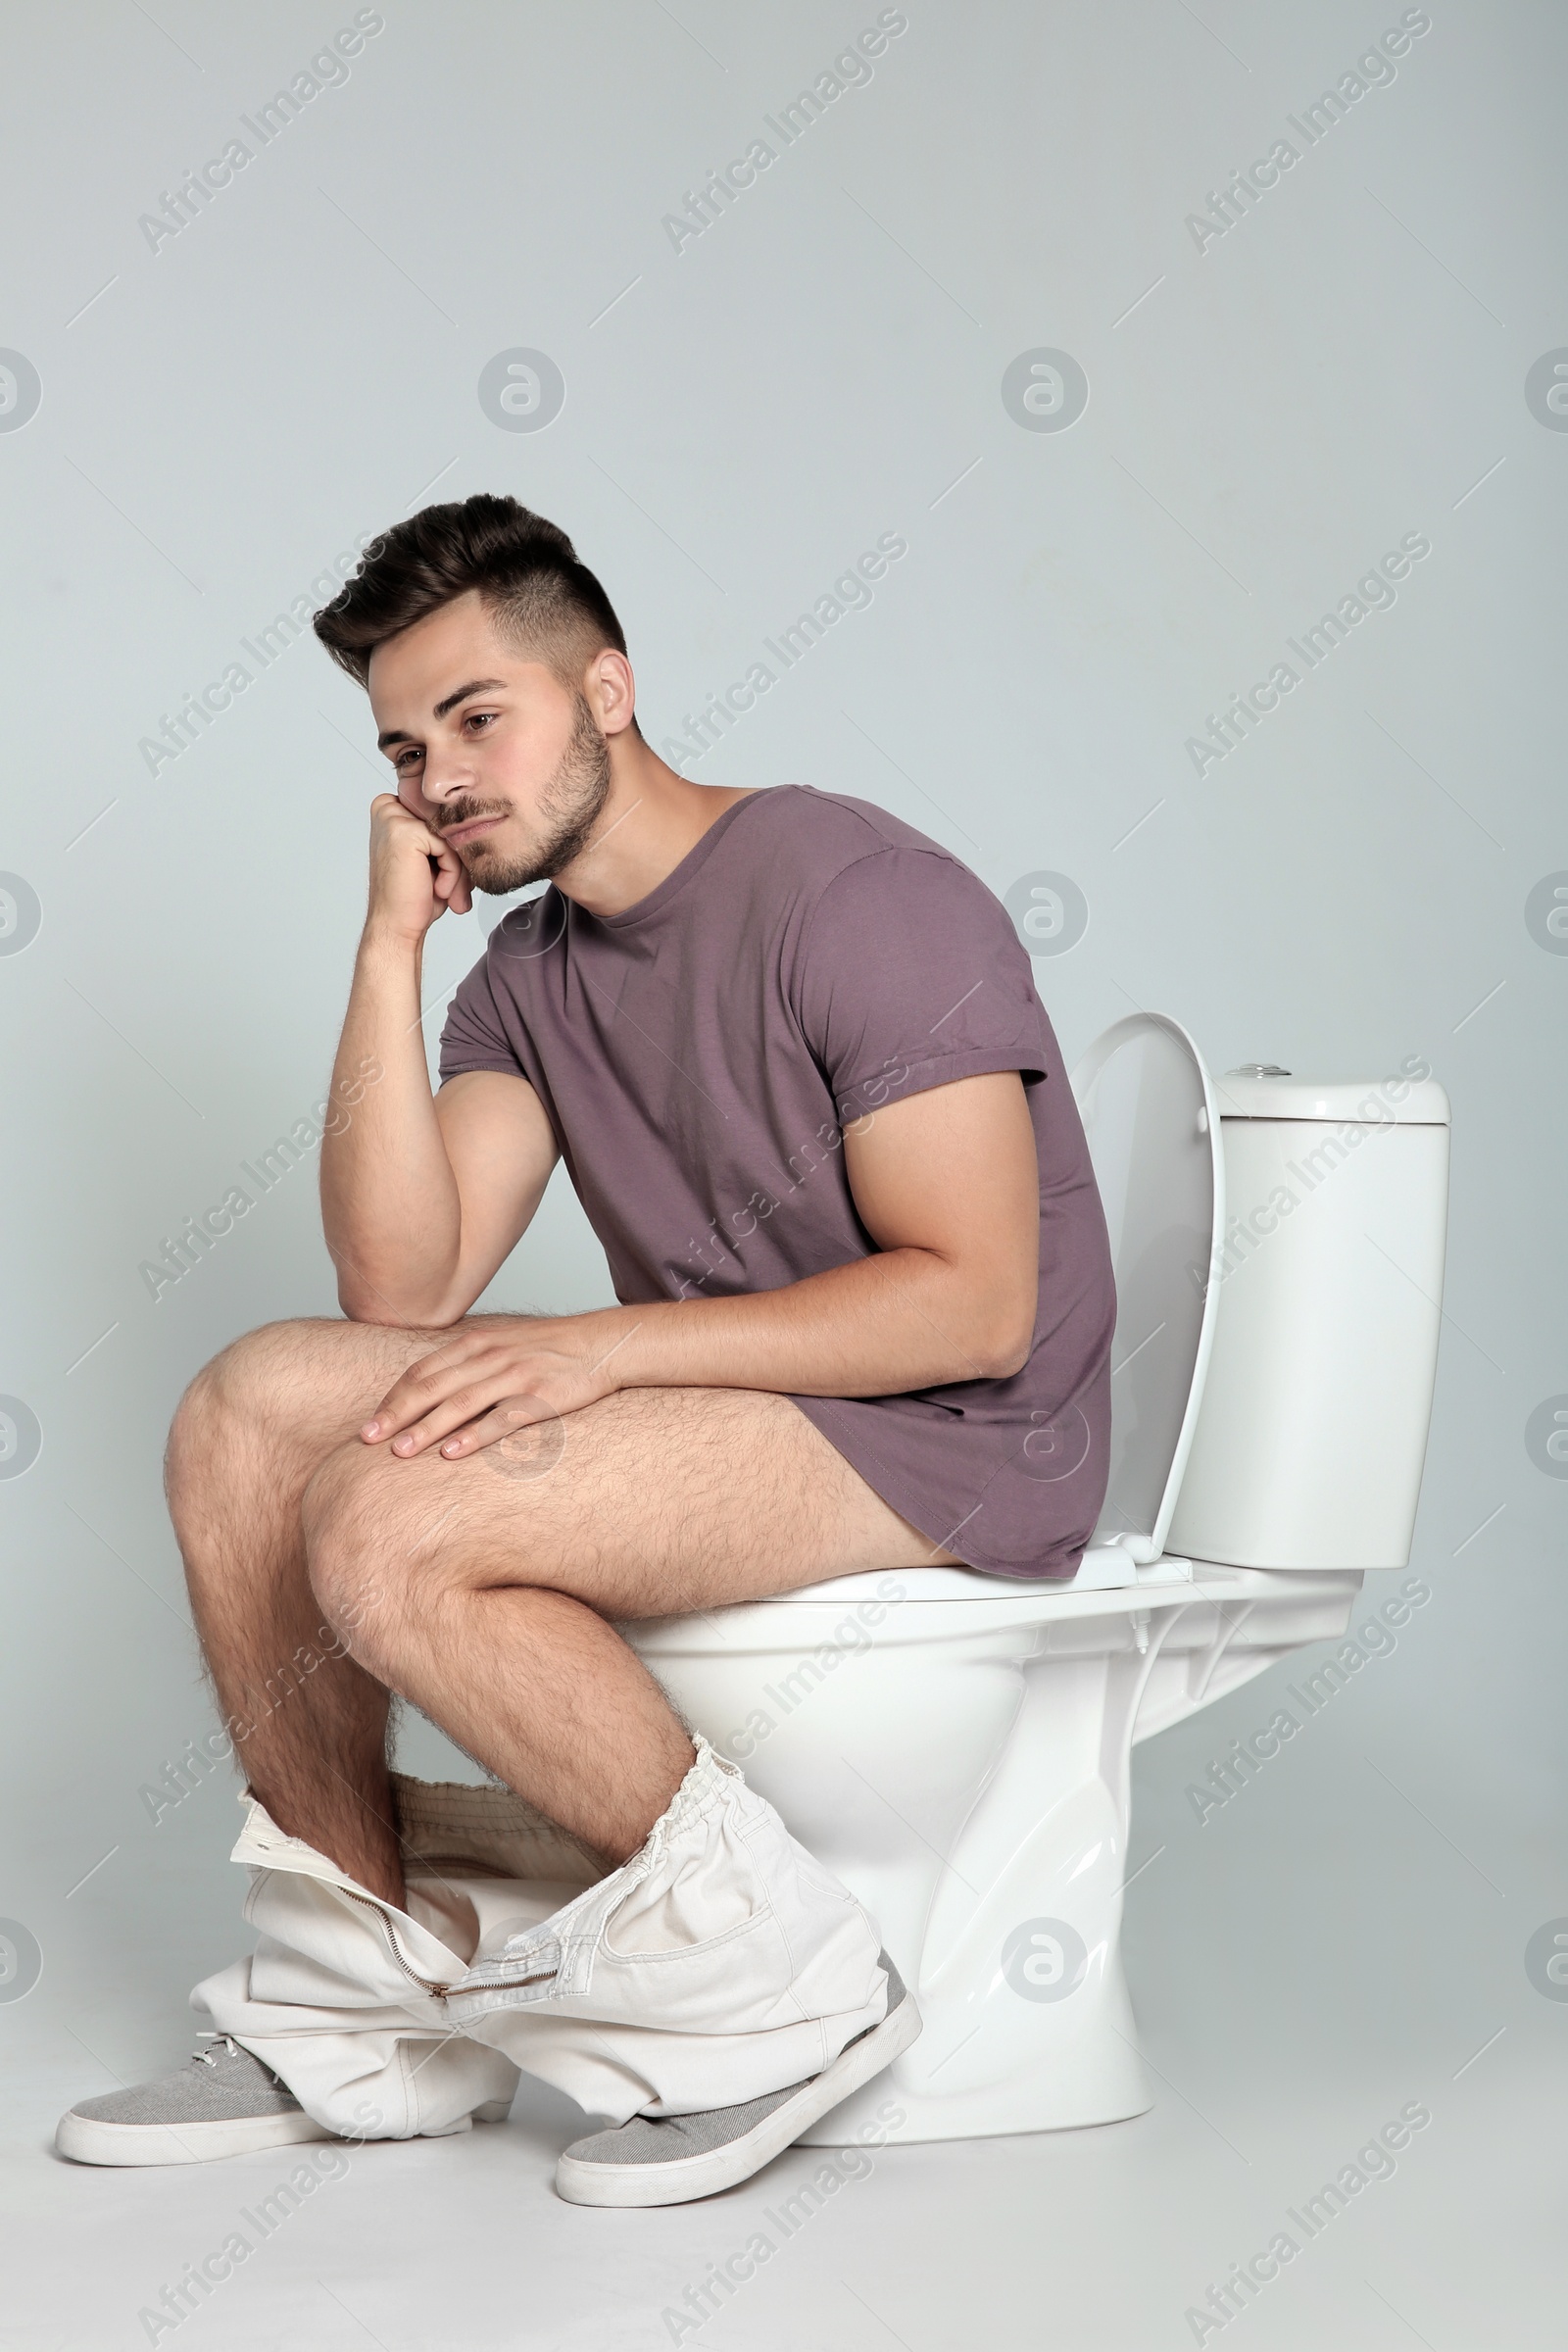 Photo of Young man sitting on toilet bowl against gray background